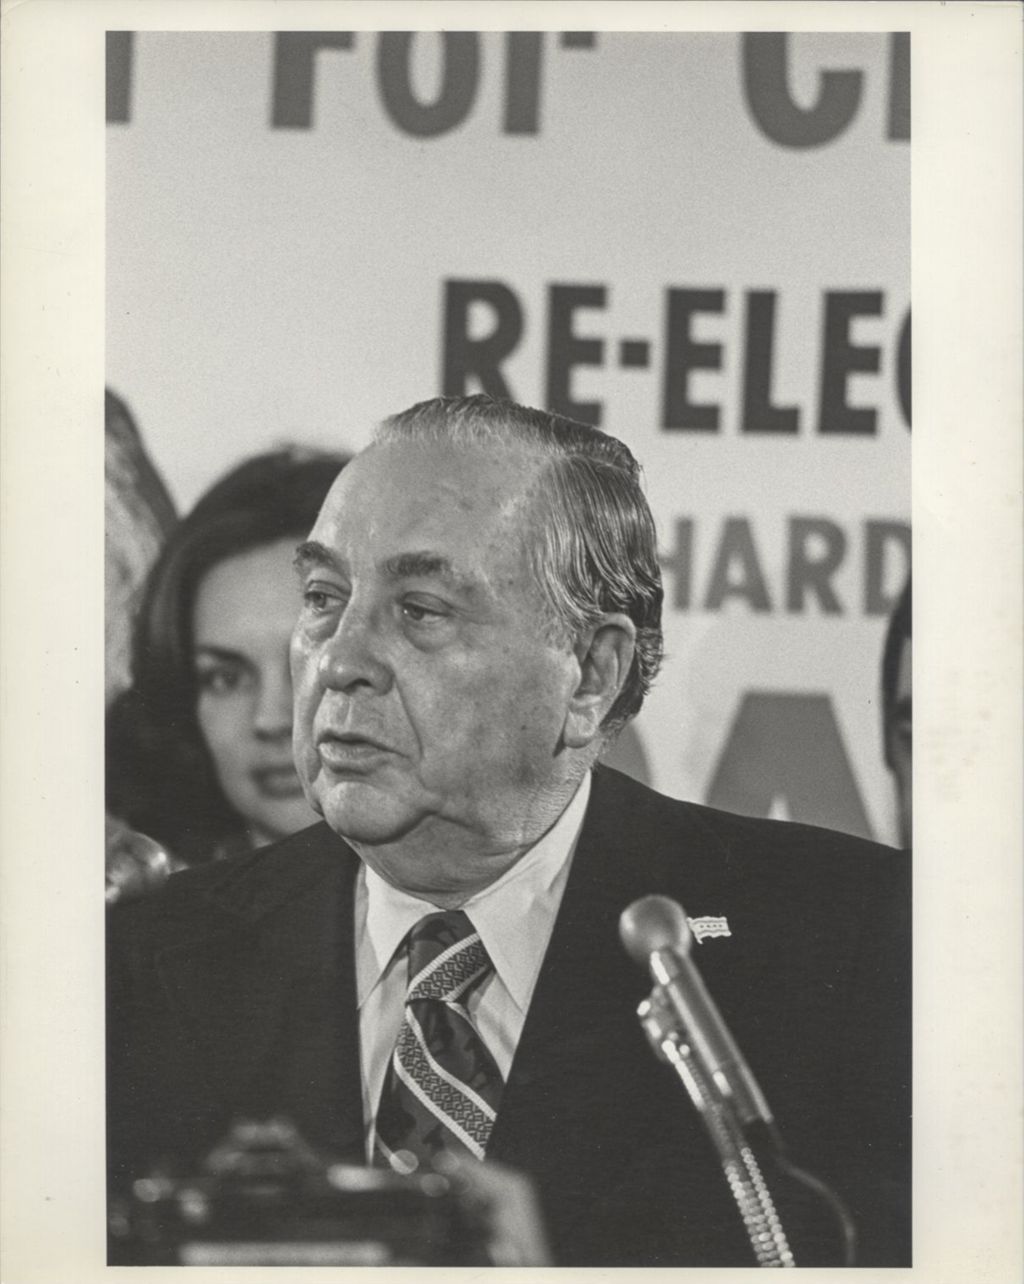 Miniature of Richard J. Daley at a microphone